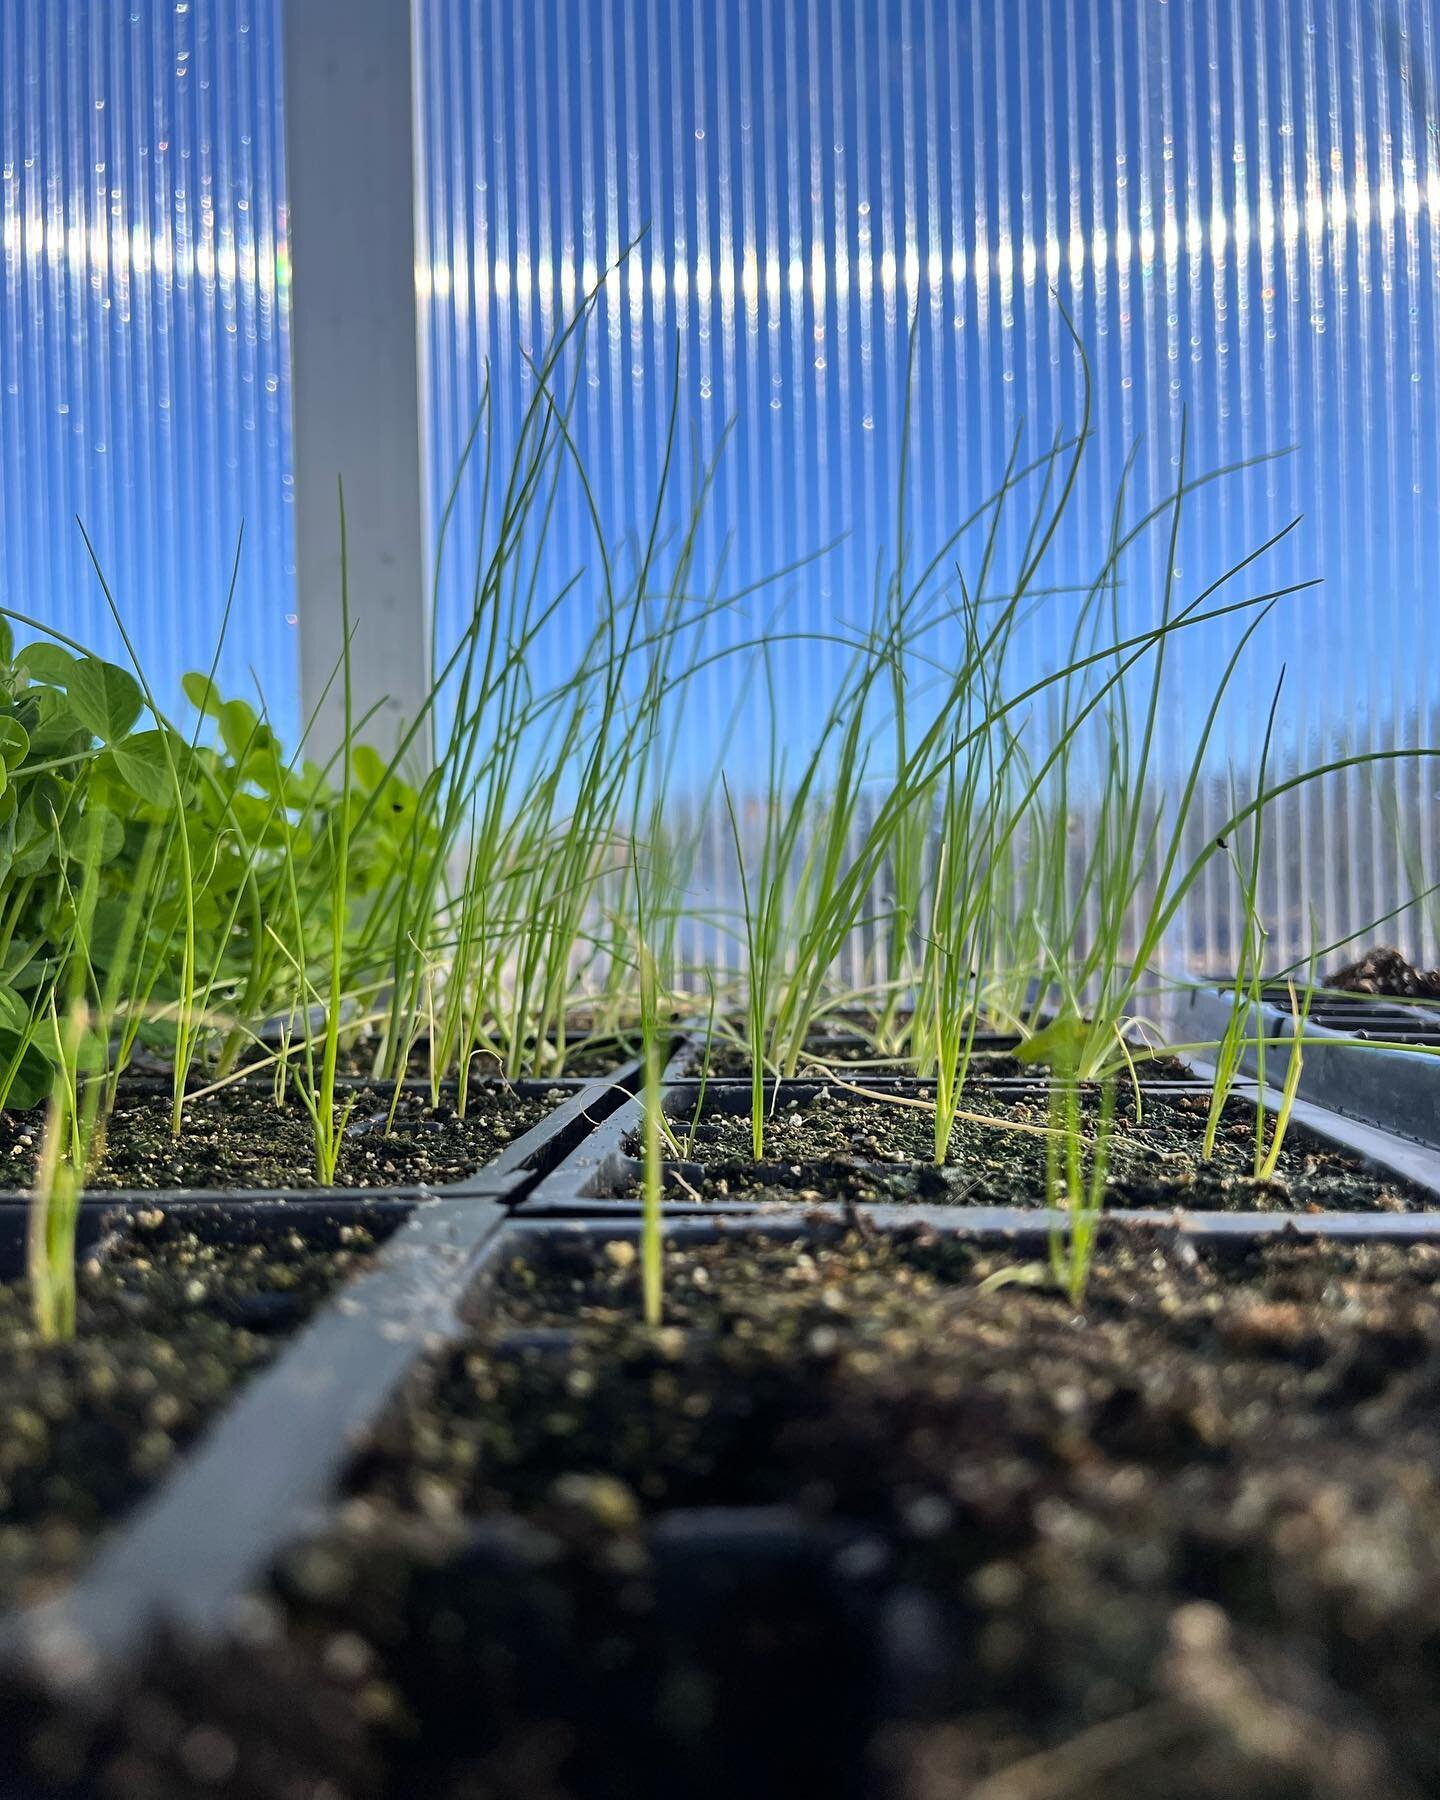 It might be cold out but inside the @growingchefsontario Community Green House at The Grove it&rsquo;s warm enough to grow a variety of vegetables all year round! 

Check out some of these new seedlings and produce that&rsquo;s been happily sprouting